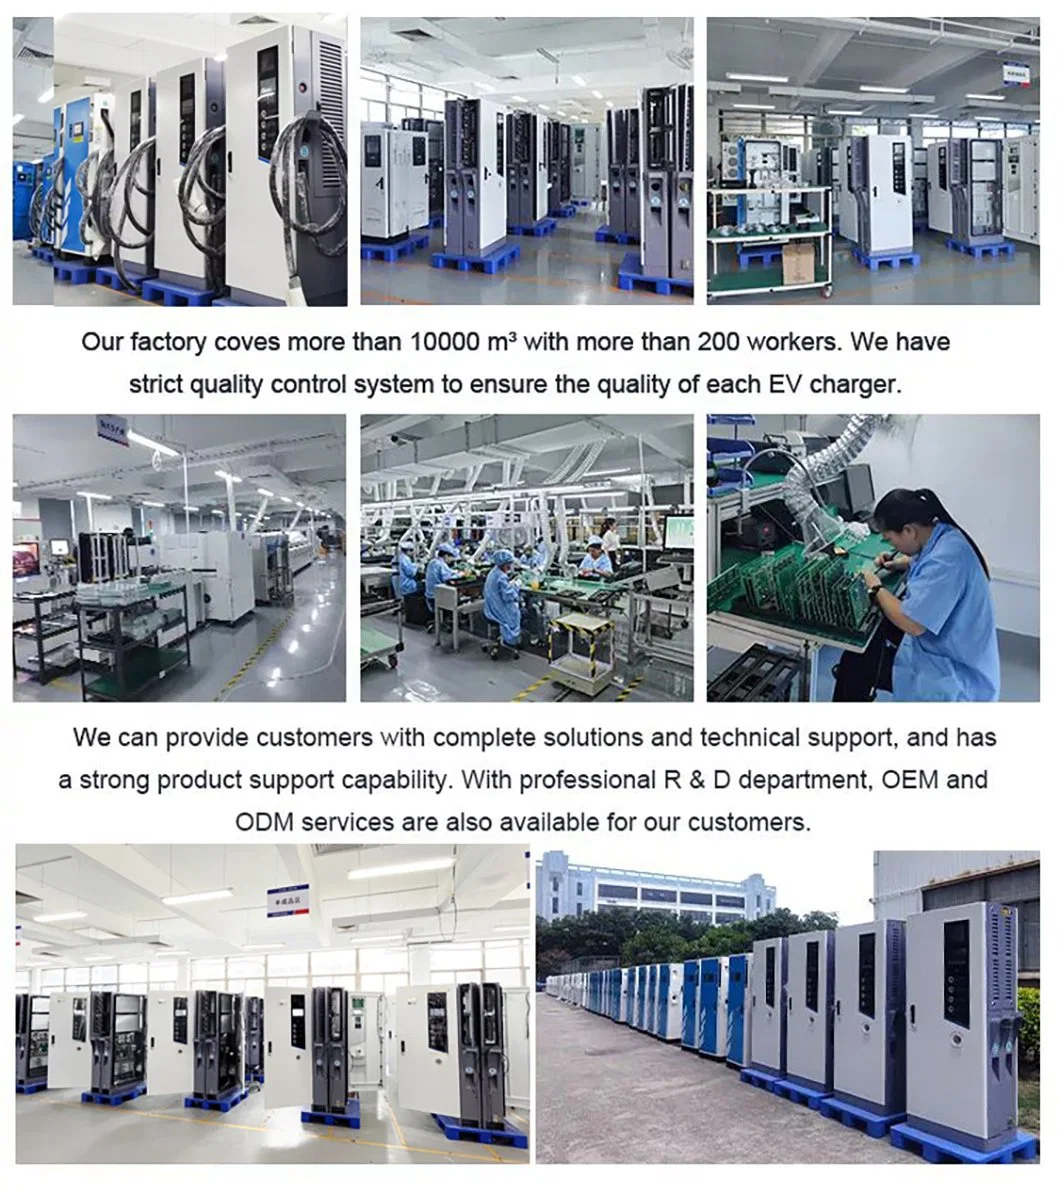 China Evse Manufacturer Ocpp 1.6j Rifd 7kw Type 2 Smart Home AC EV Fast Charging Piles Companies for Electric Vehicles